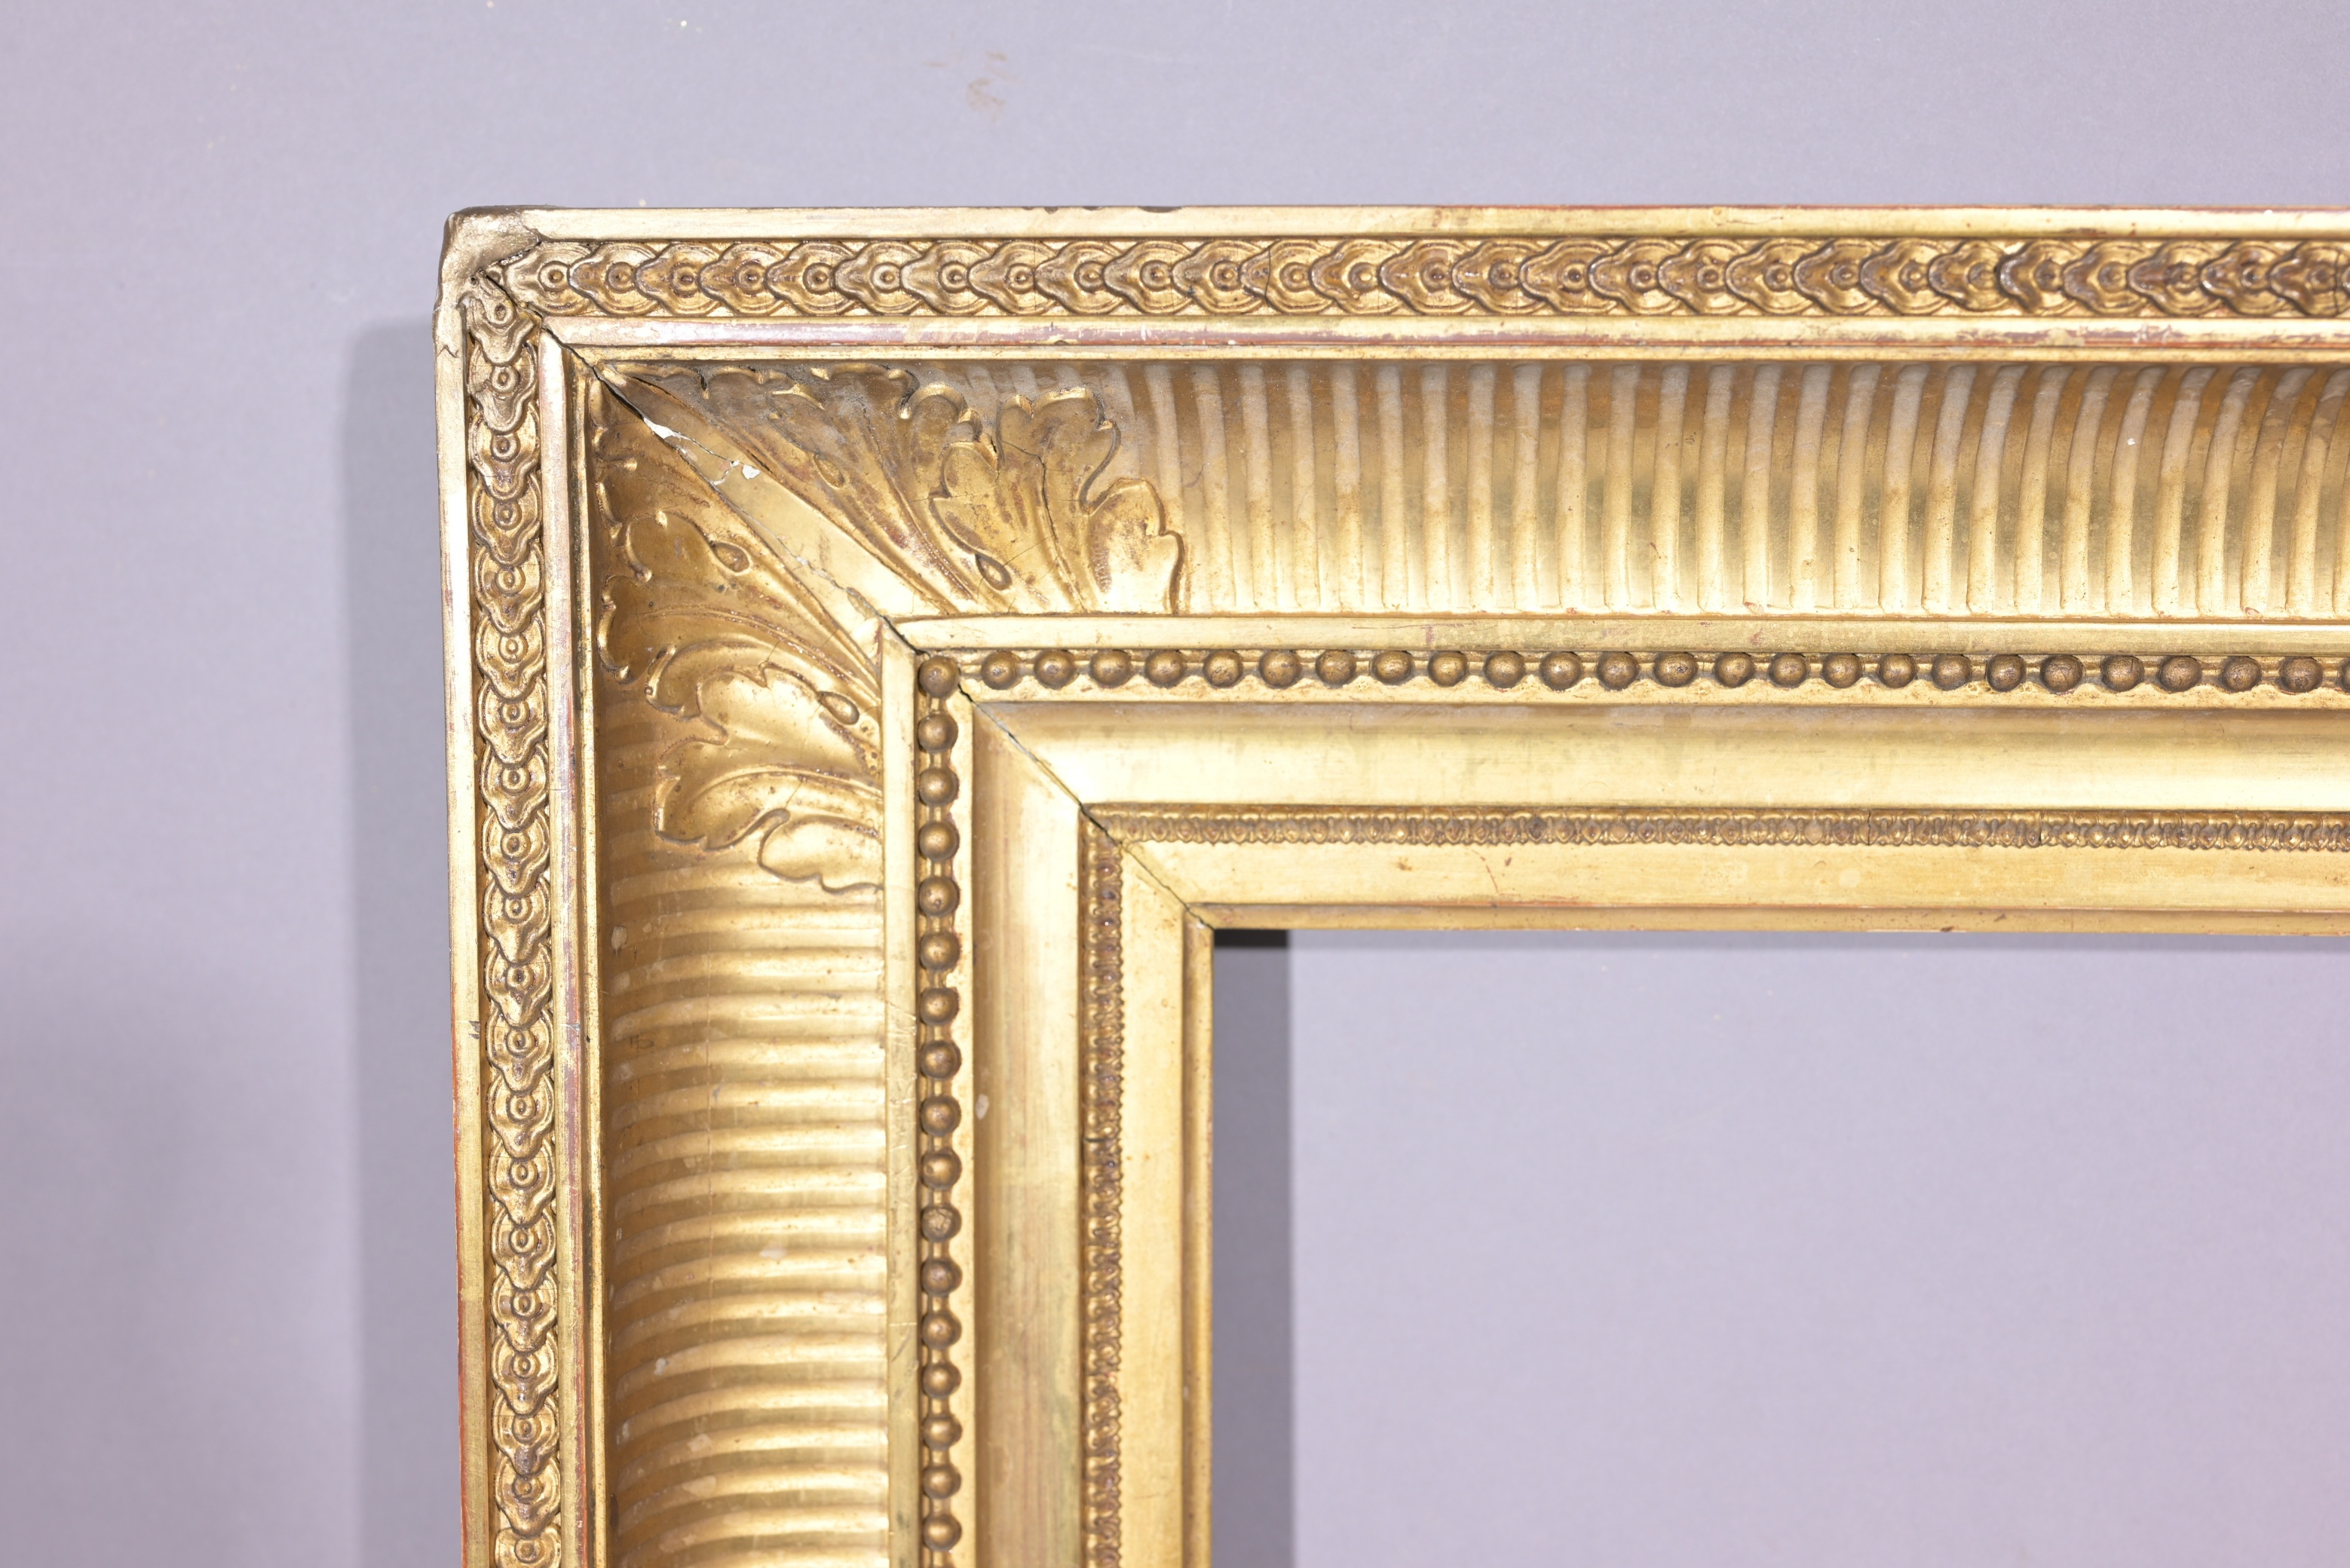 French 19th C. Fluted Cove Frame - 18 x 14 - Image 2 of 8